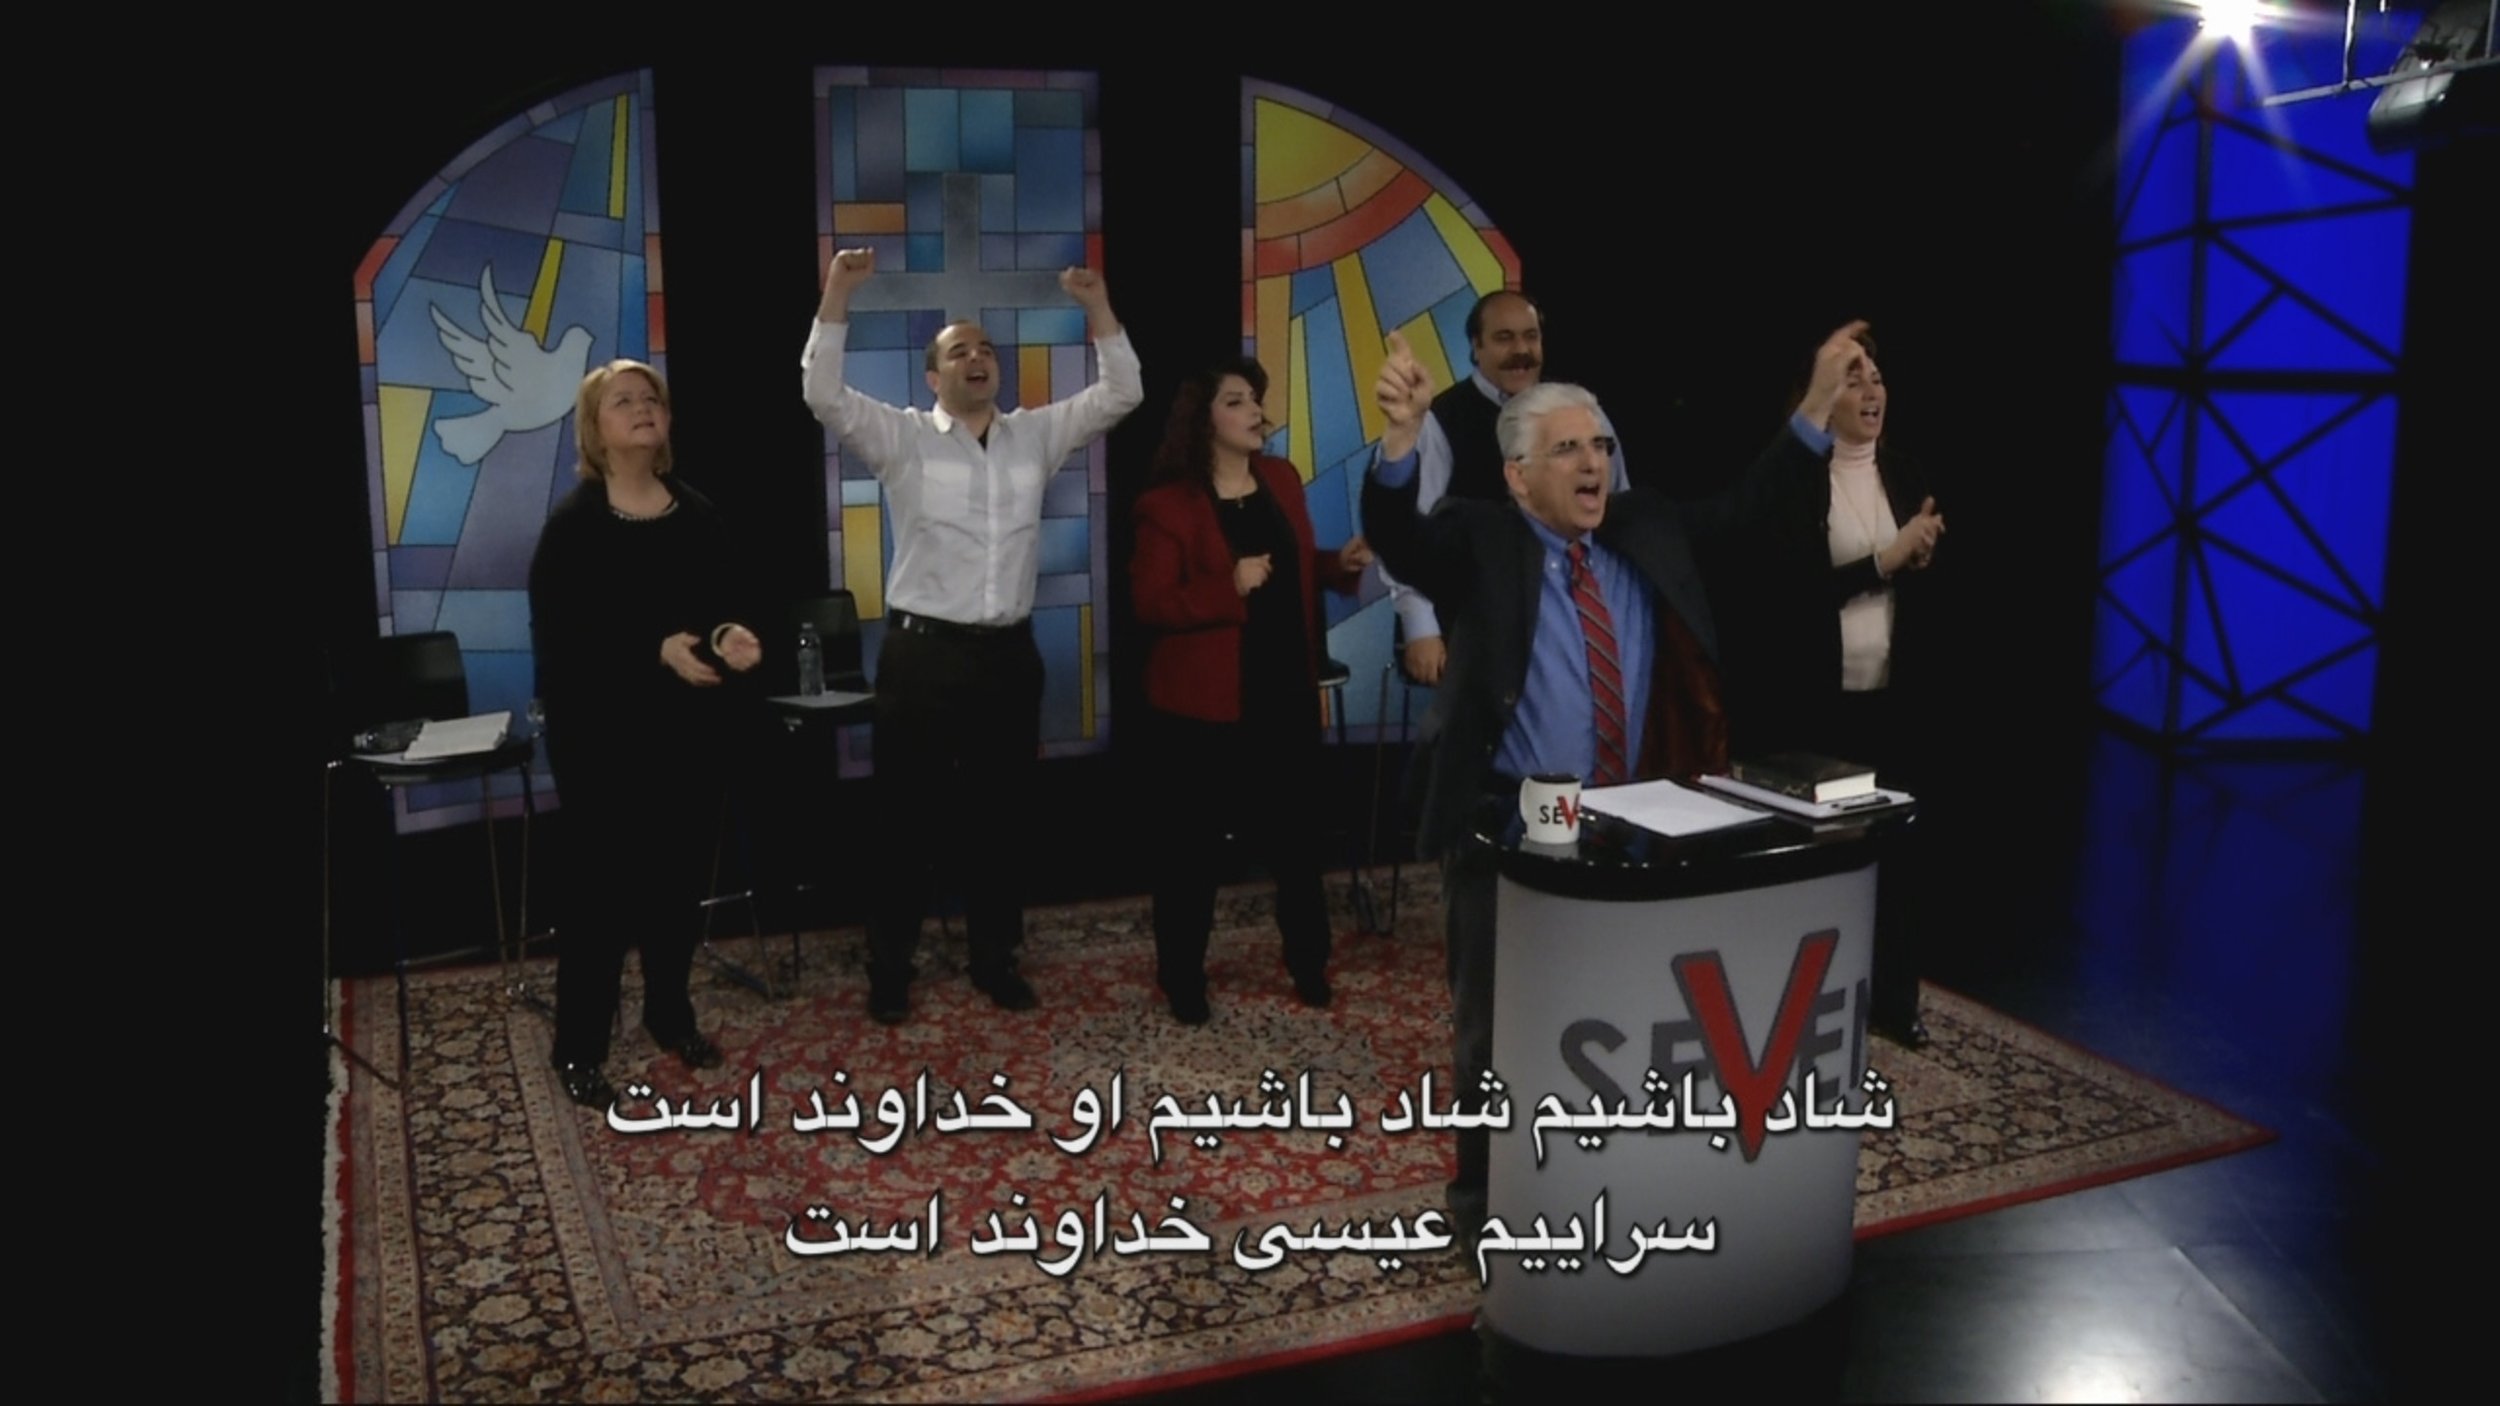 Broadcasting a worship service from the Iran Alive Ministries studio